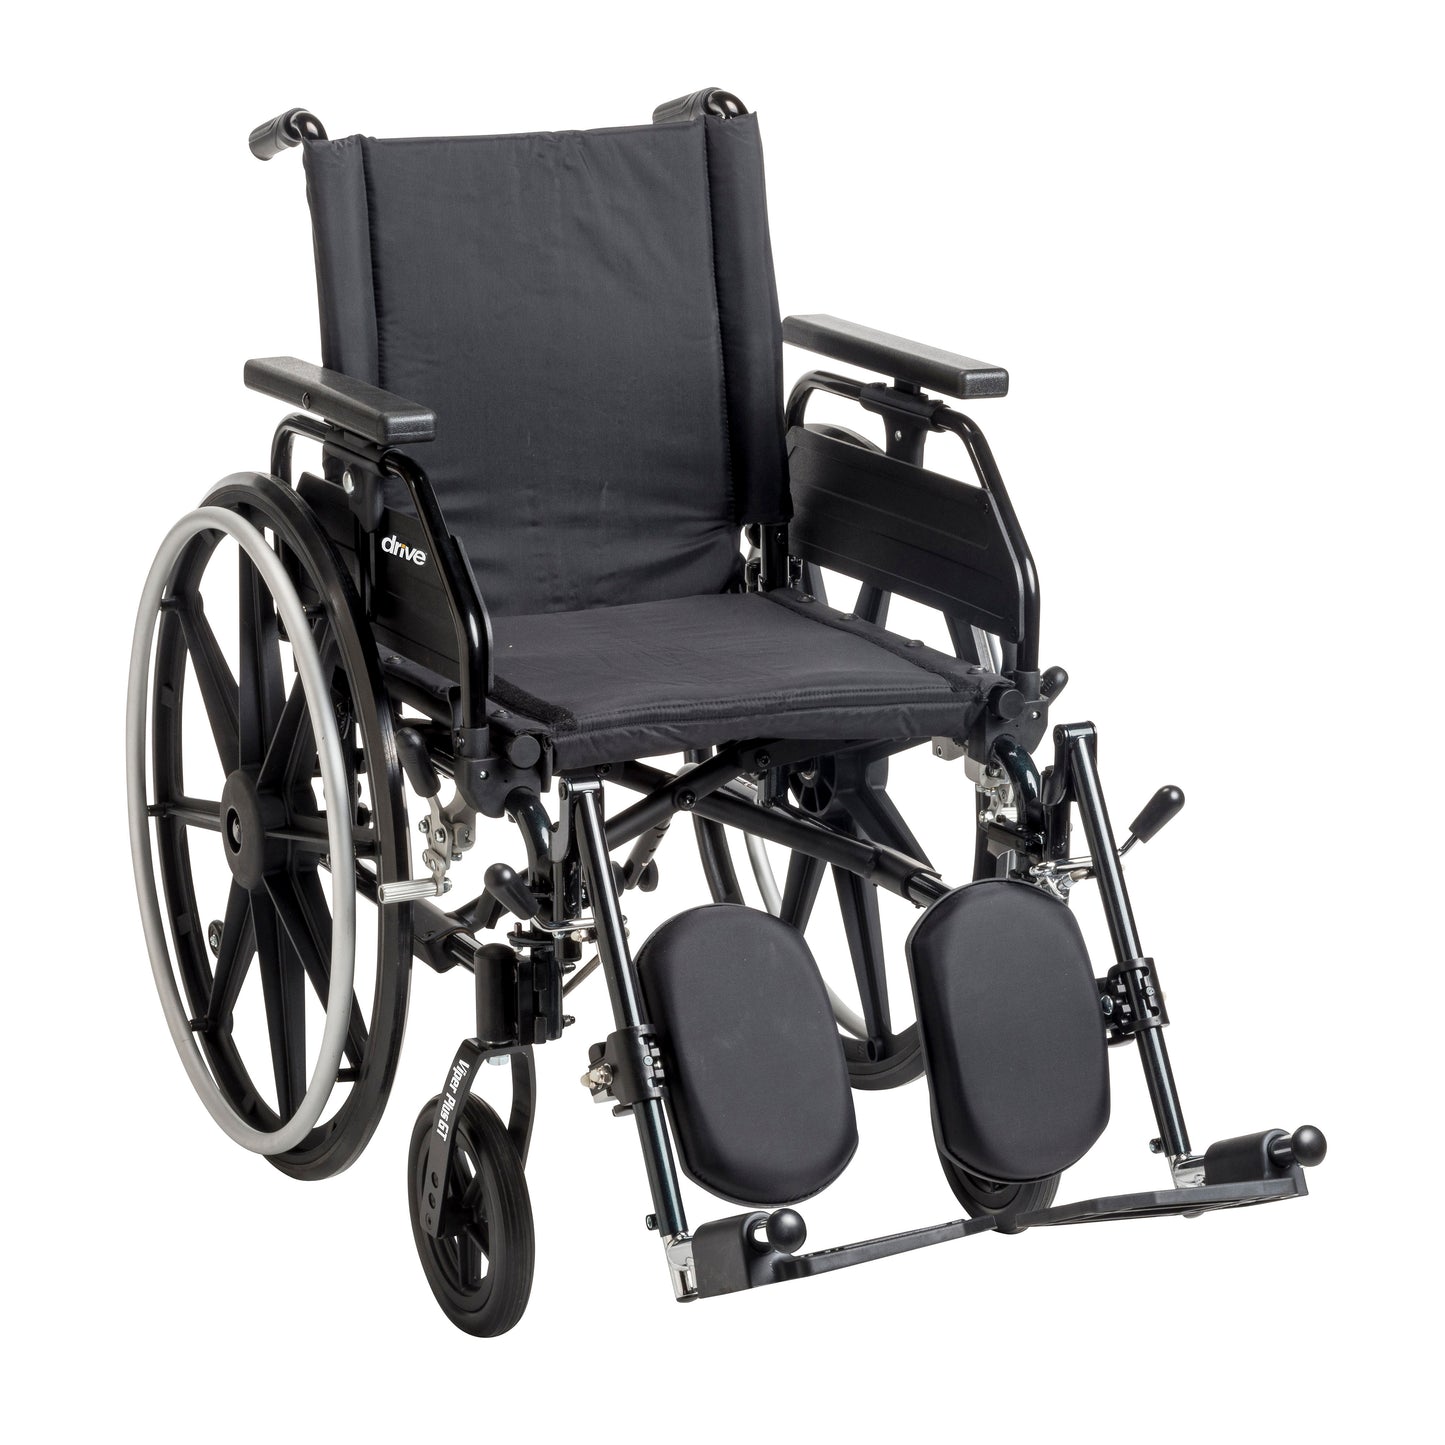 Viper Plus GT Wheelchair with Universal Armrests, Elevating Legrests, 16" Seat